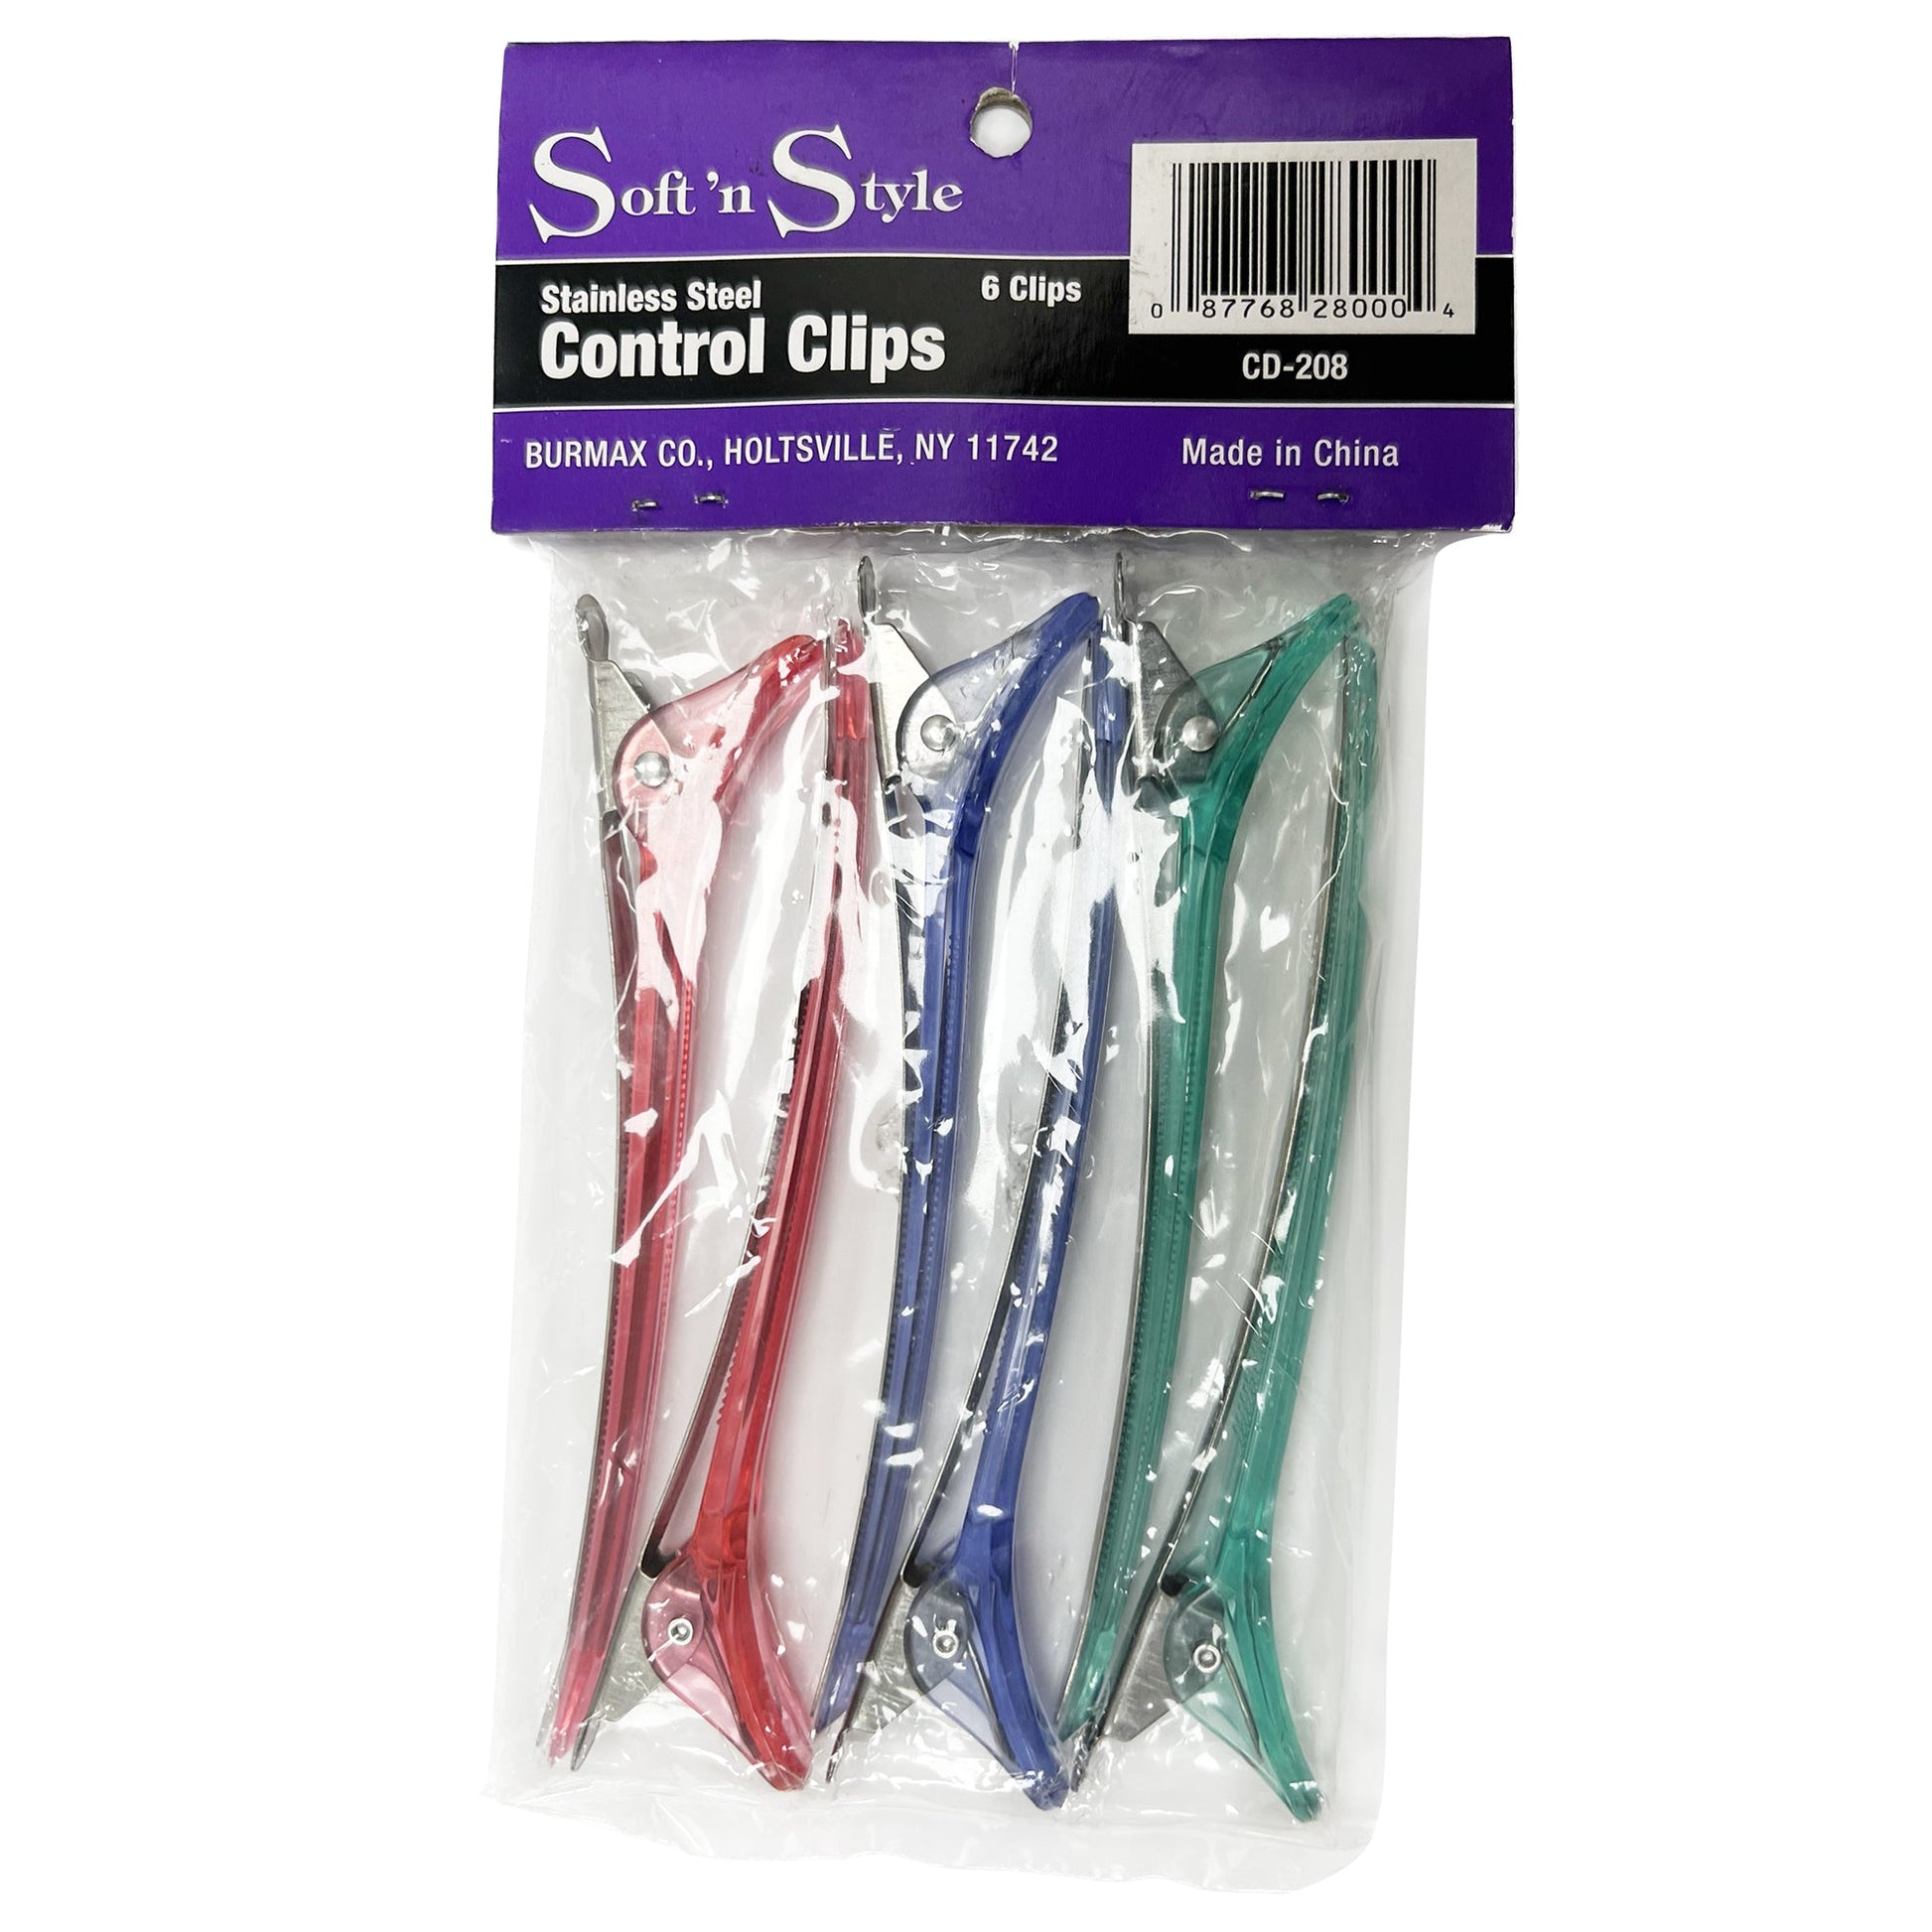 Stainless Steel | 6 Clips | Control Clips | CD-208 | SOFT N STYLE - SH Salons